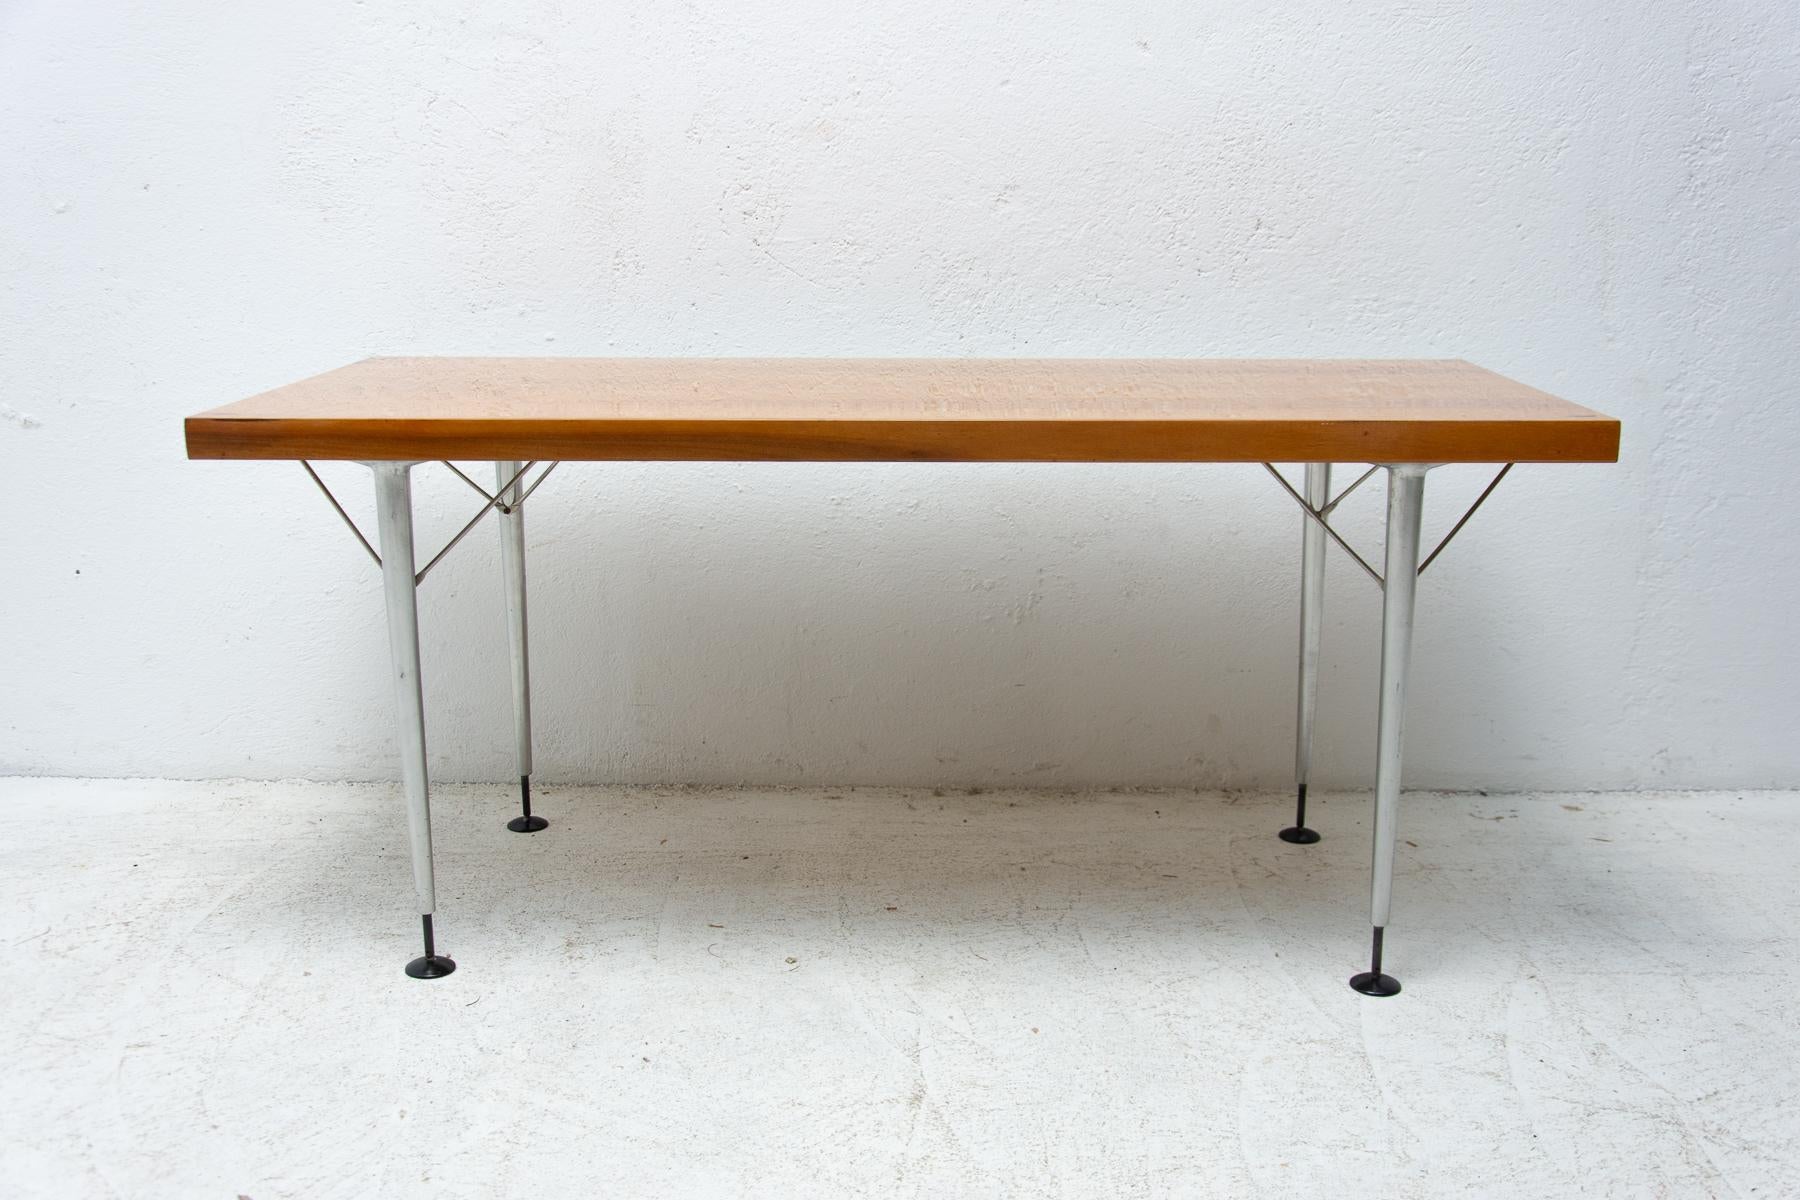 This coffee table was made by ÚP Závody in the former Czechoslovakia in the 1960s. The table reminiscent to the Scandinavian Design School and is characterized by simplicity and metal joints under the desk top. The table is in very good Vintage